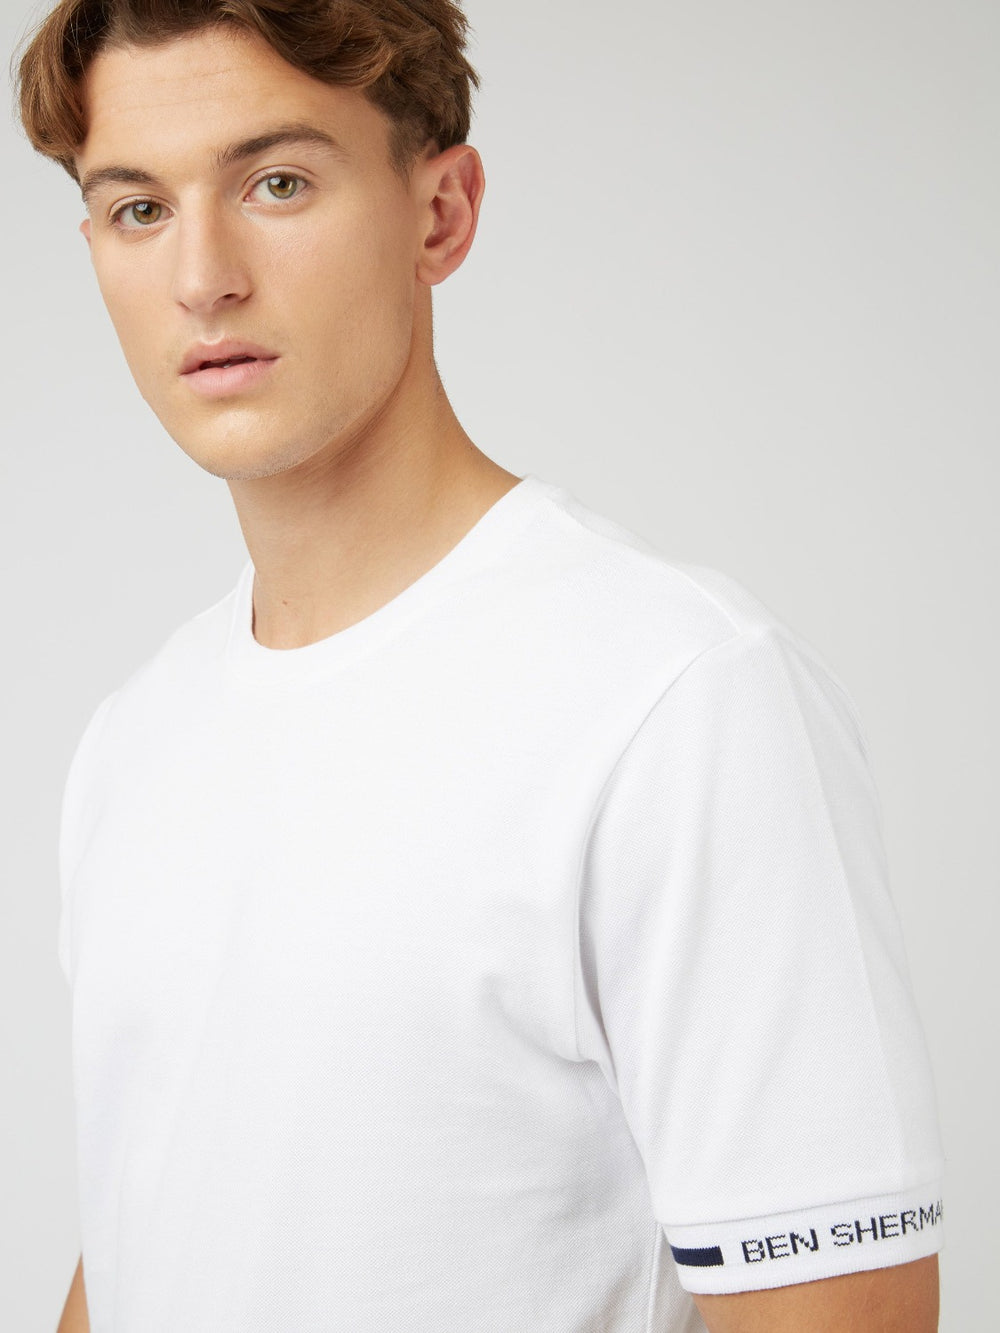 Signature Cotton Embroidered Cuff Tee - Ben Sherman